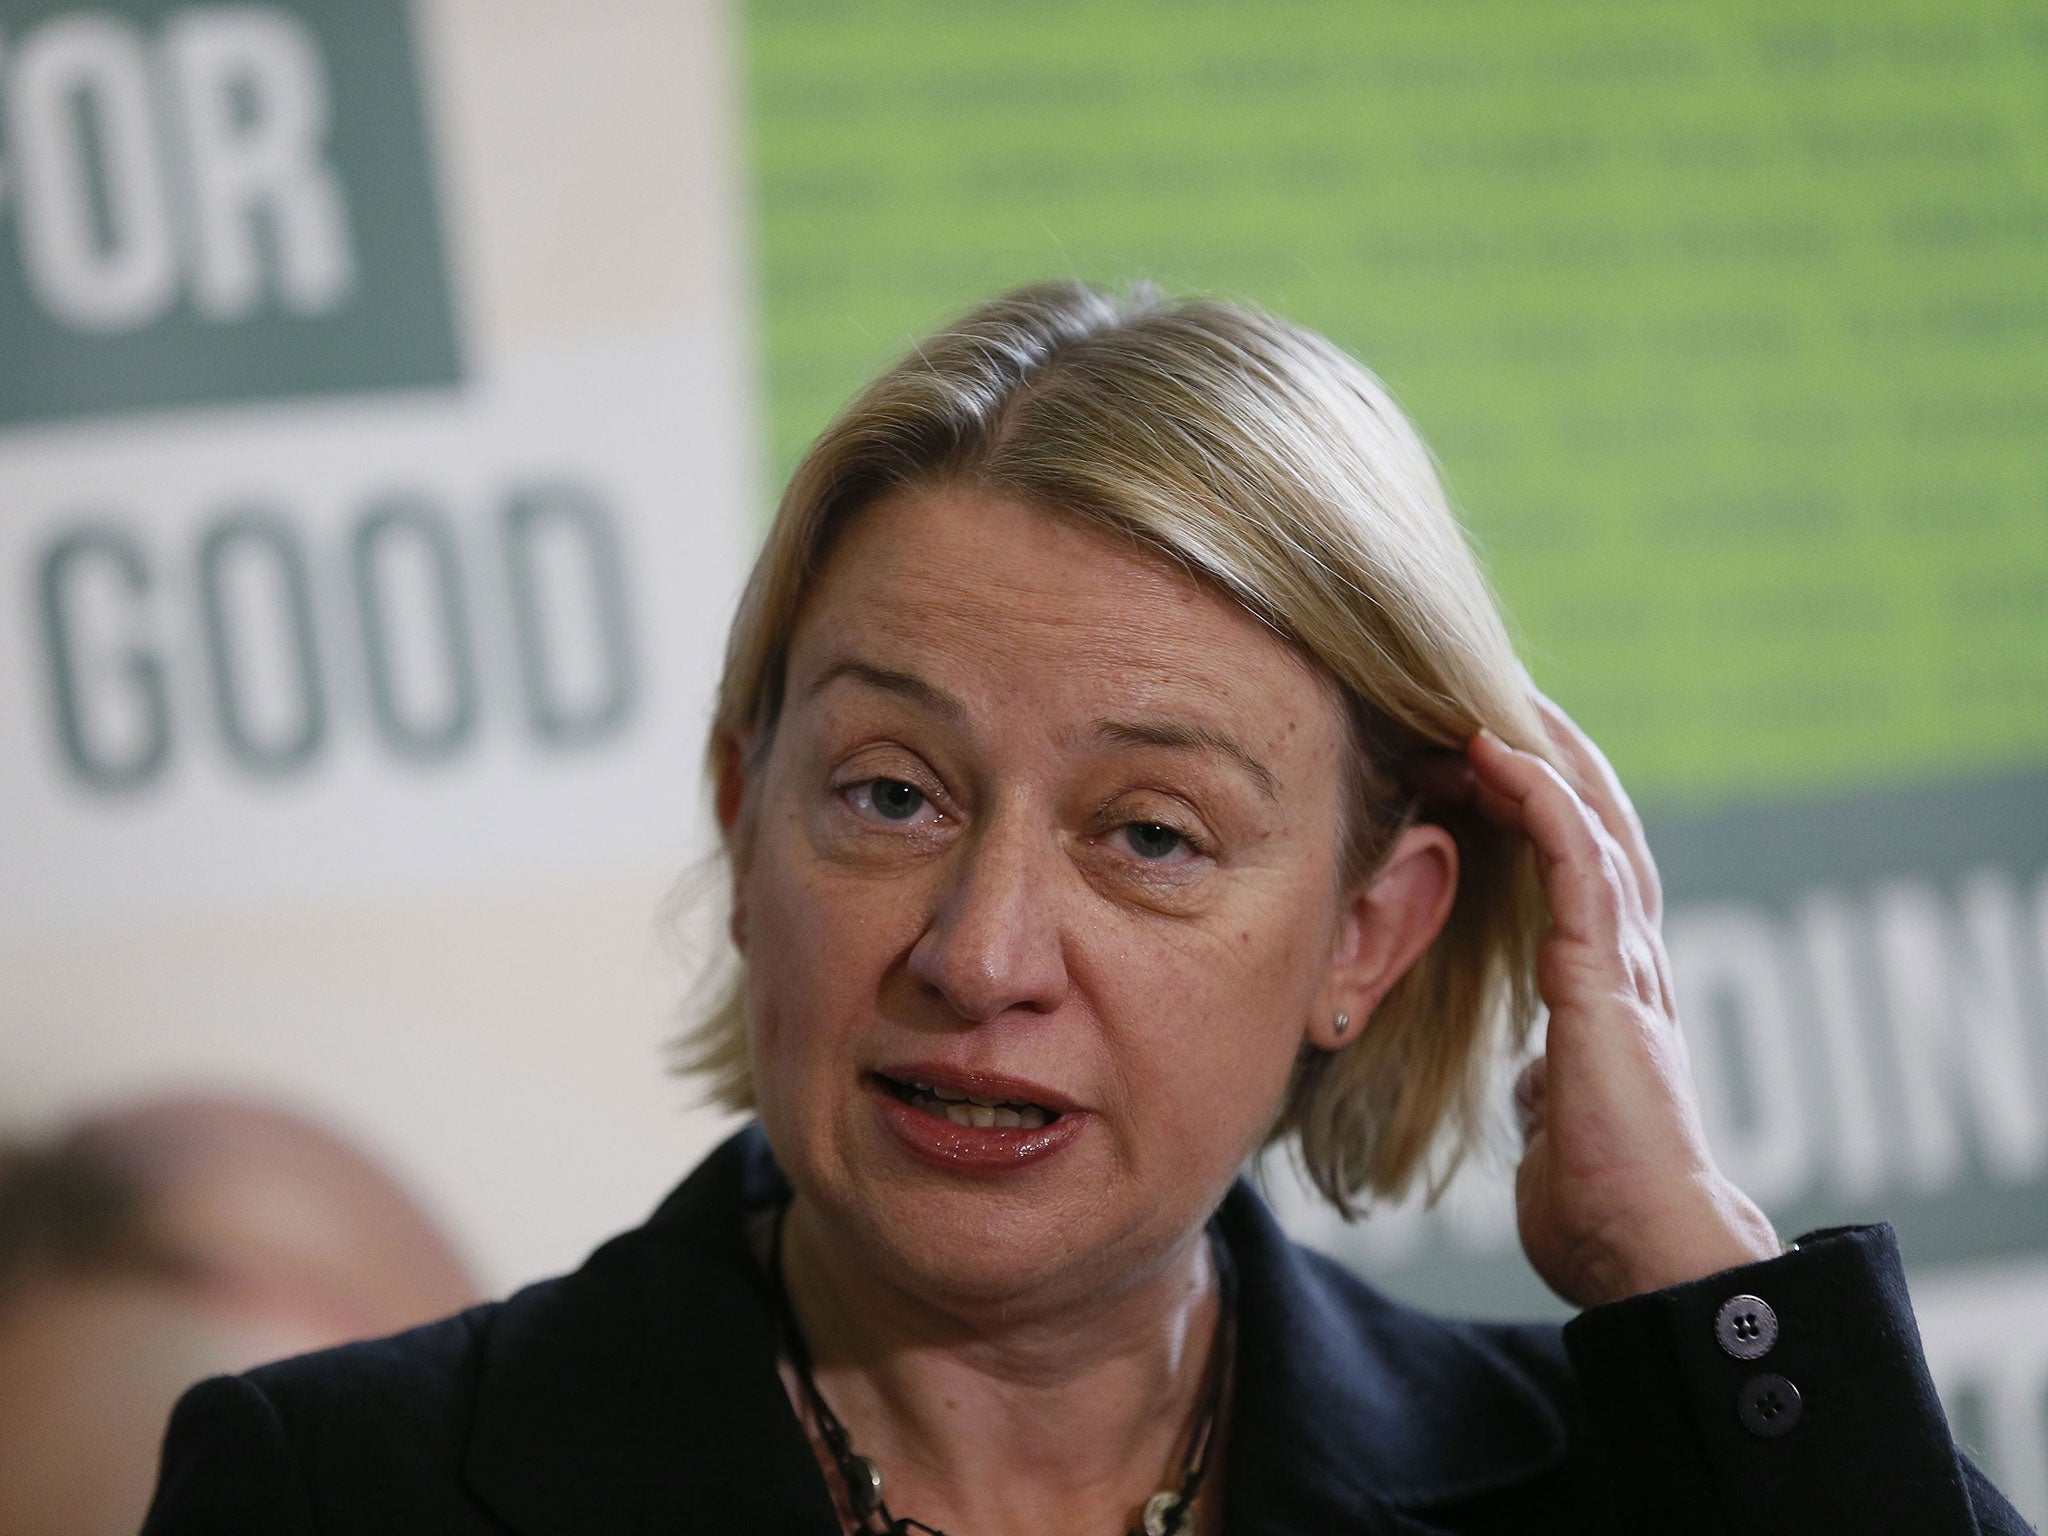 Britain's Green Party leader Natalie Bennett speaks during the party's general election campaign launch in central London on 24 February, 2015